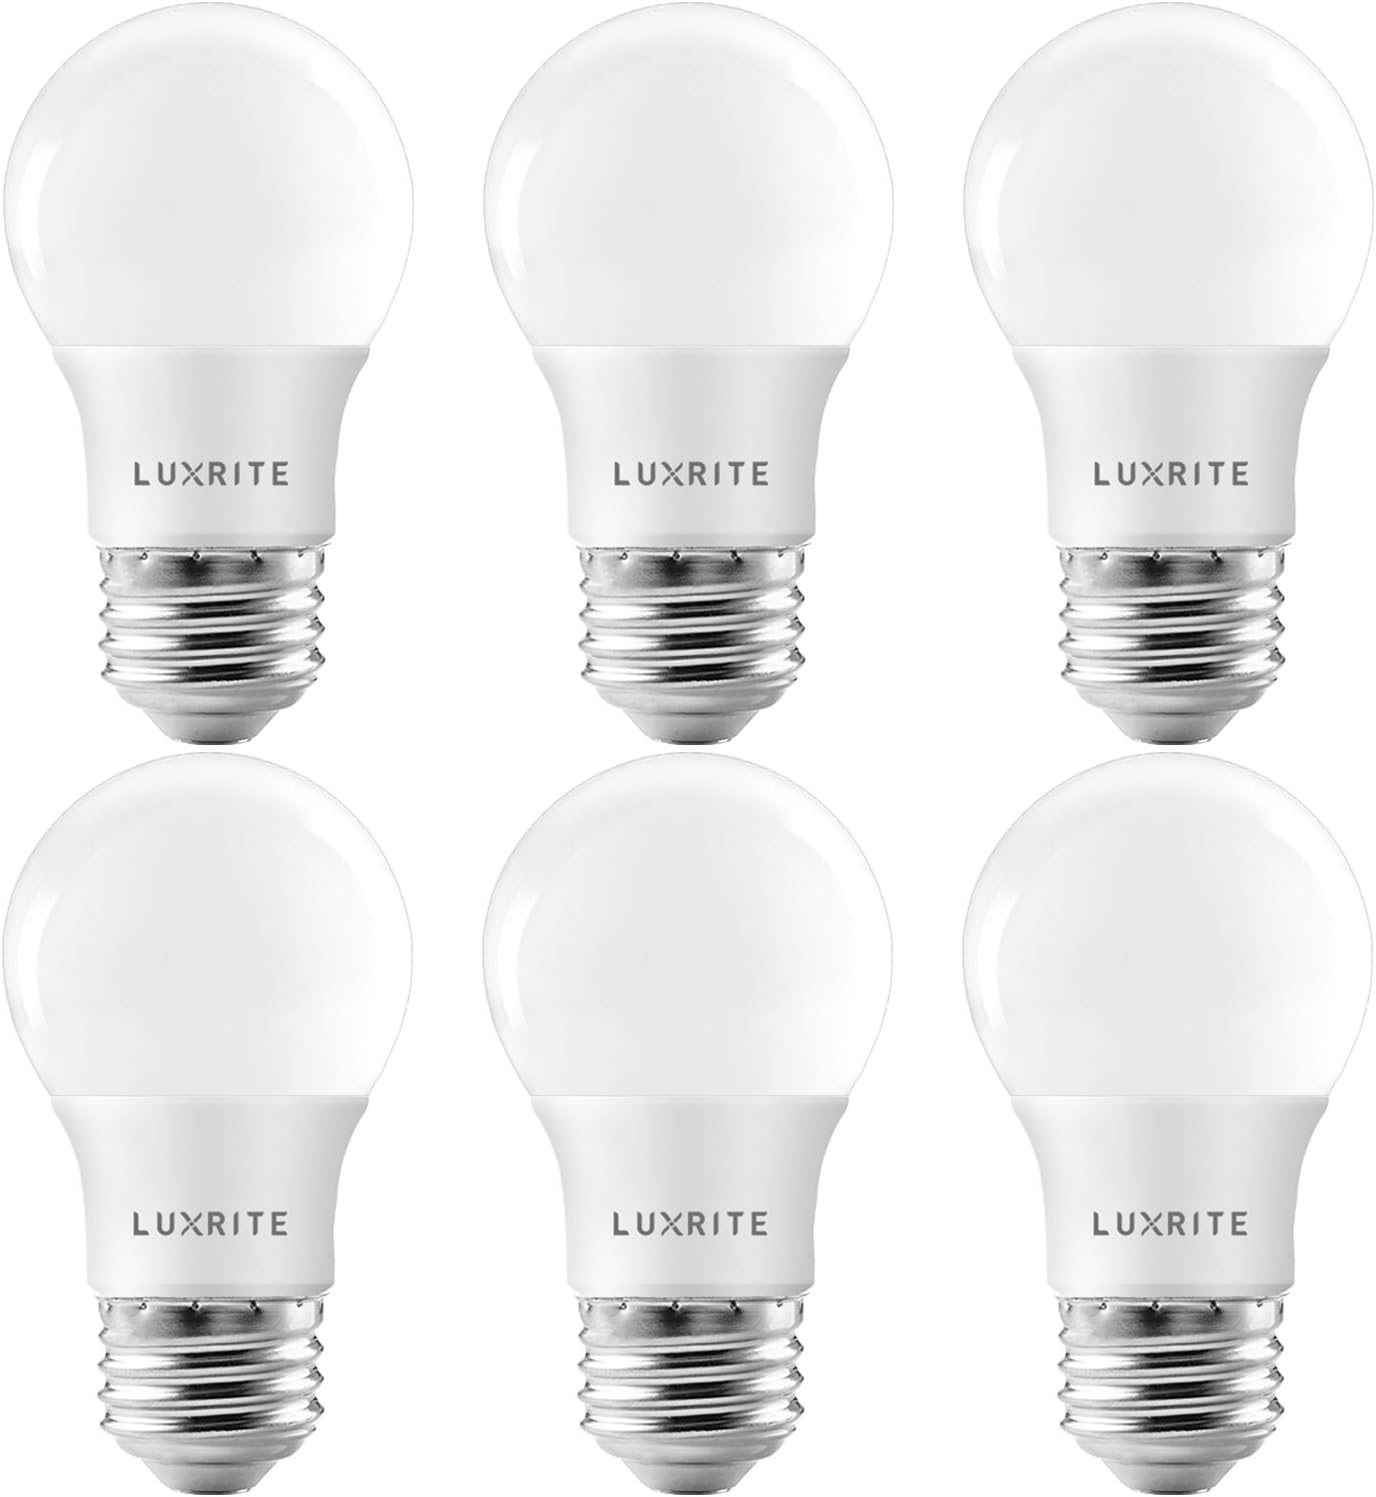 LUXRITE A15 LED Bulb 40W Equivalent Review